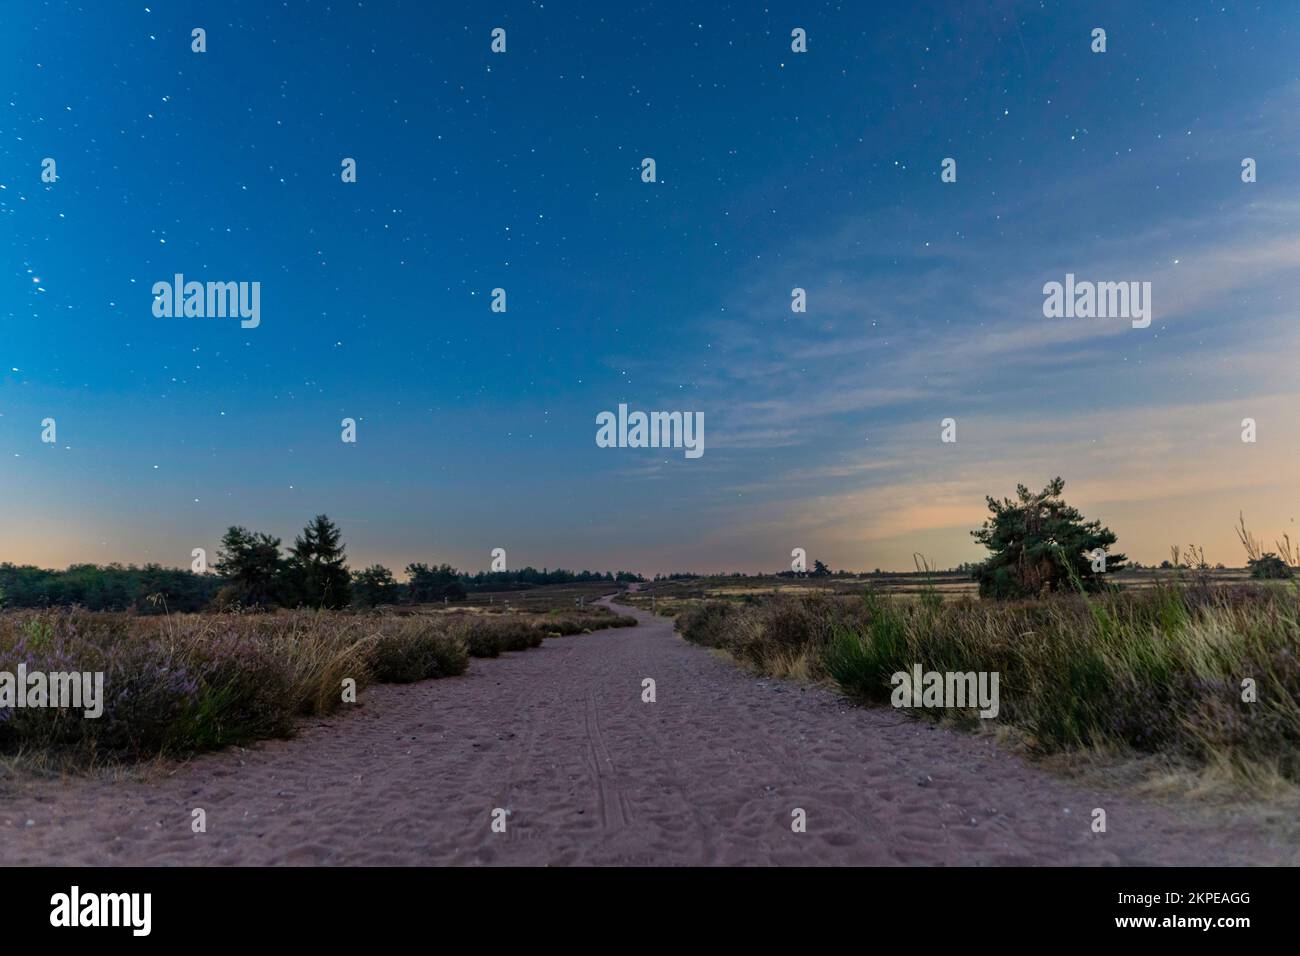 A beautiful view of a trail in the field in the evening with early stars in the sky Stock Photo